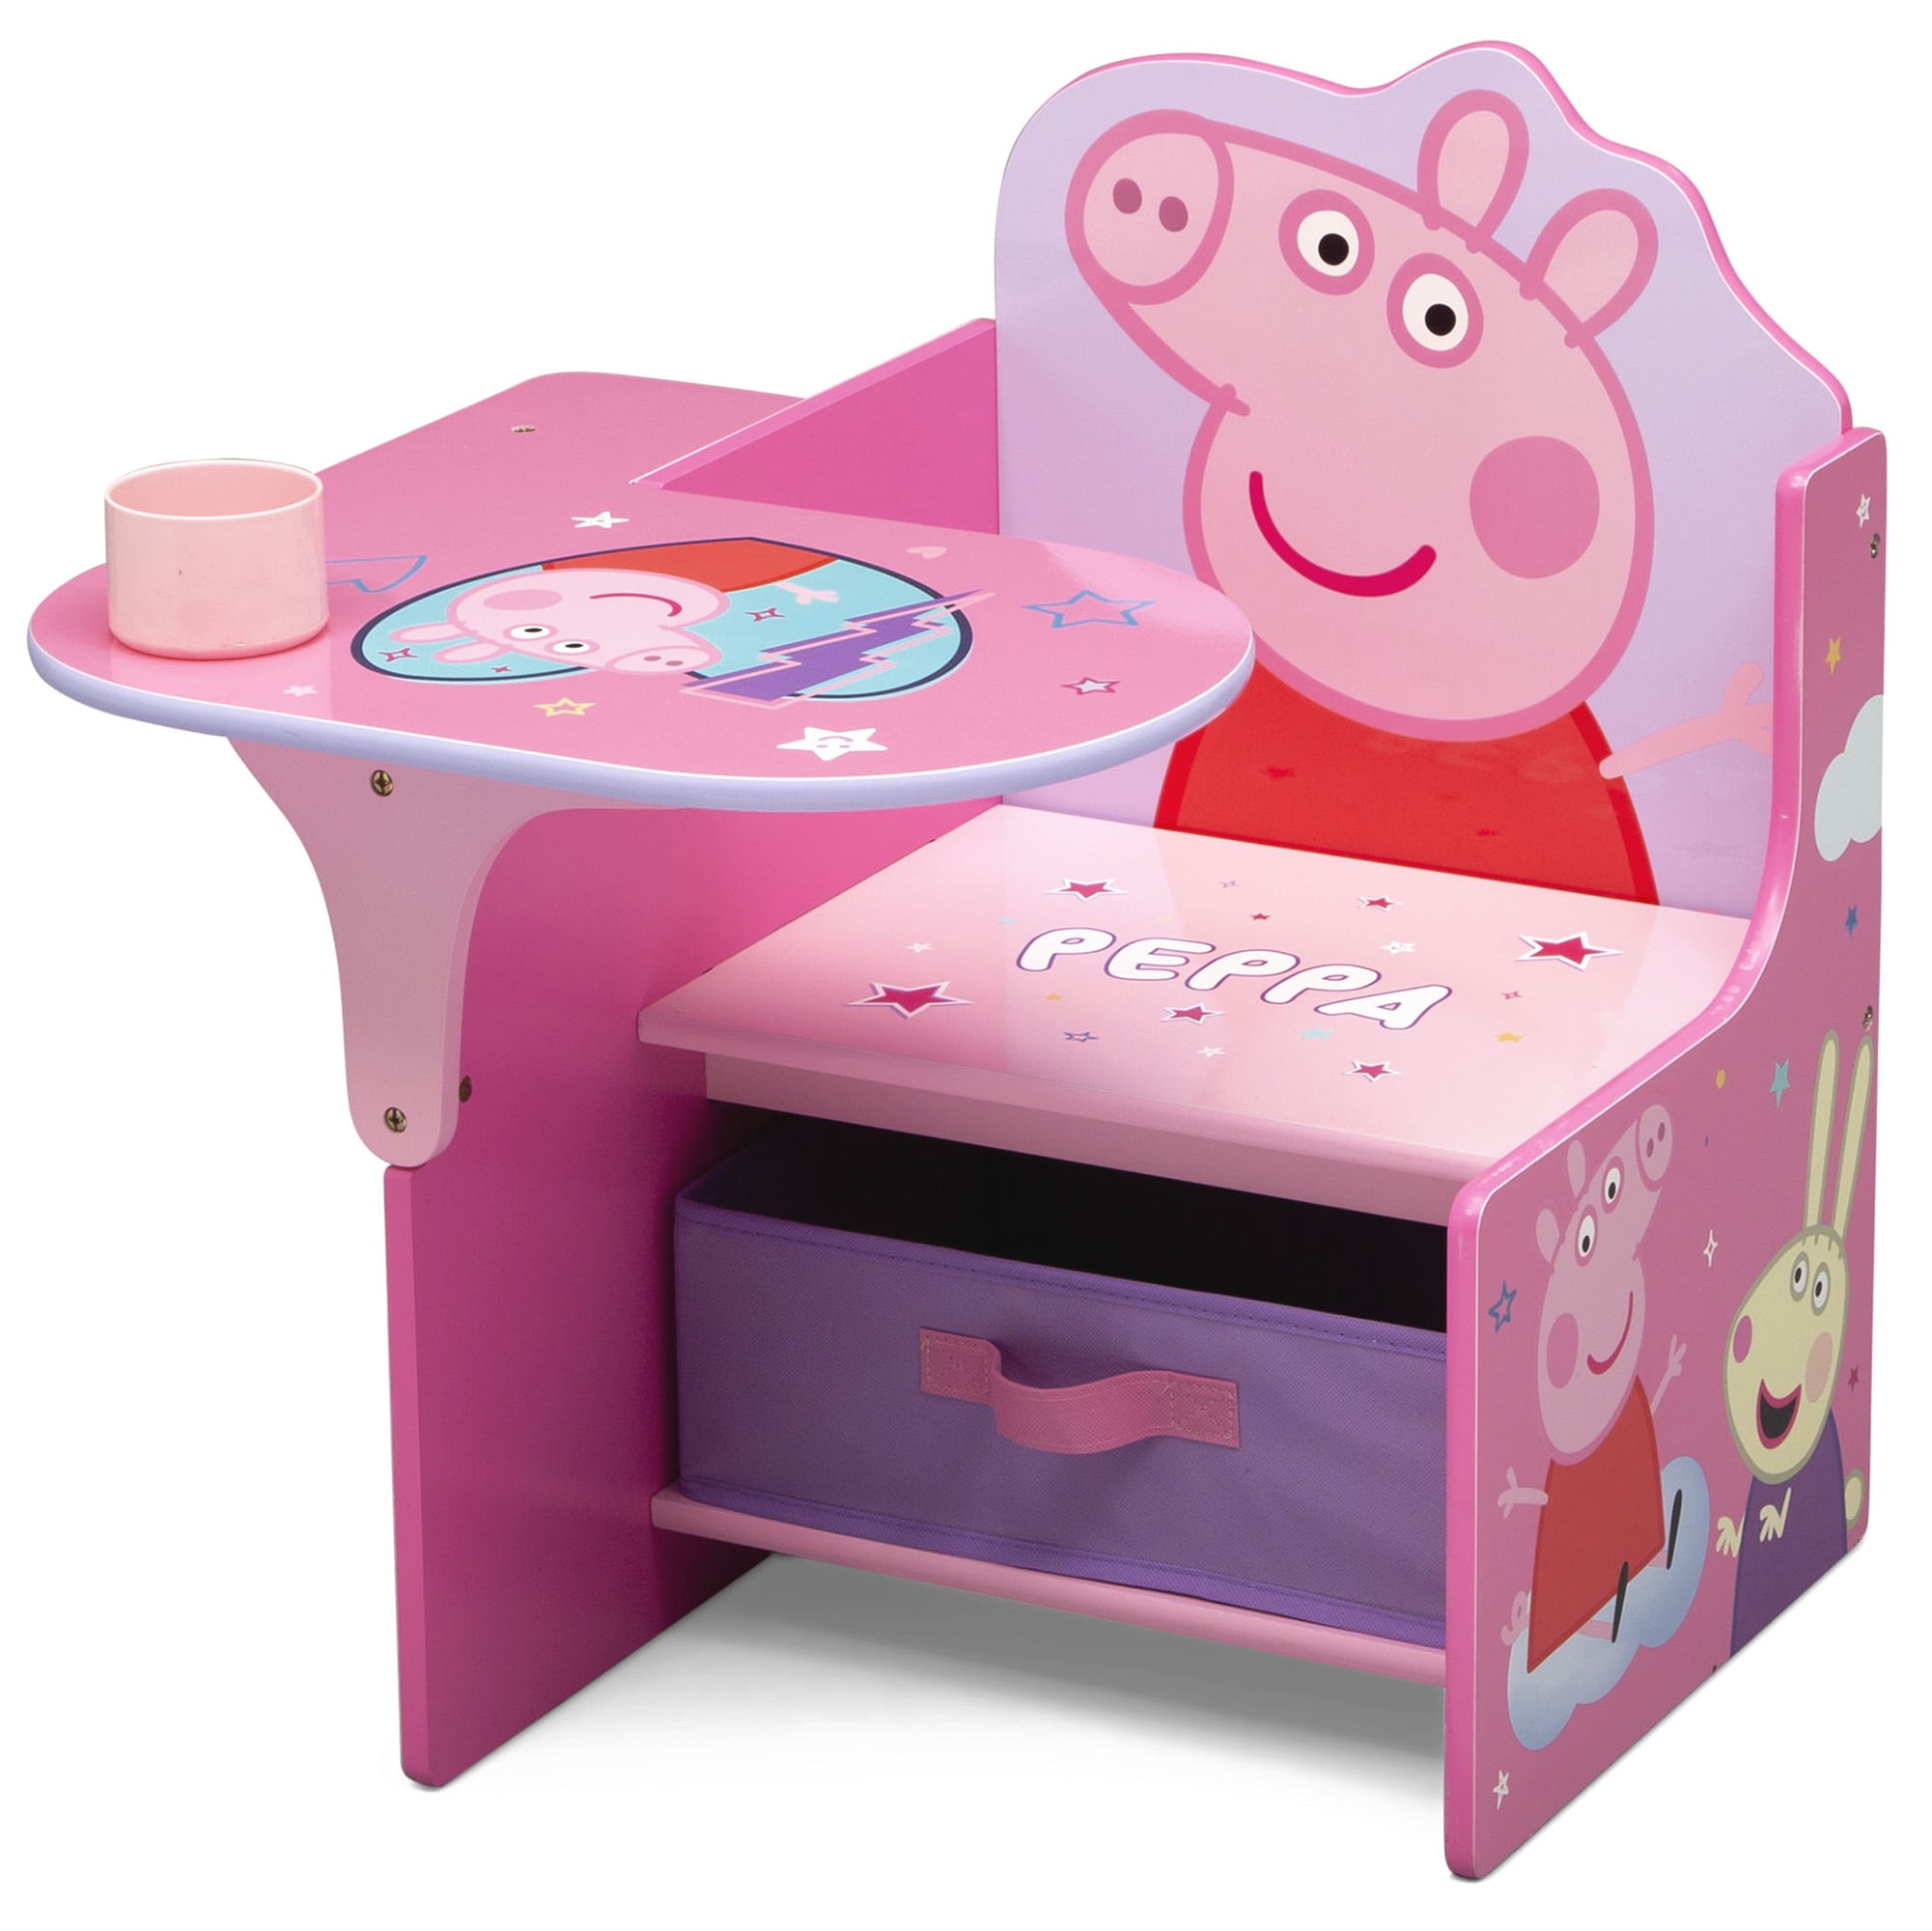 Disney Minnie Mouse Chair Desk With, Minnie Mouse Chair Desk